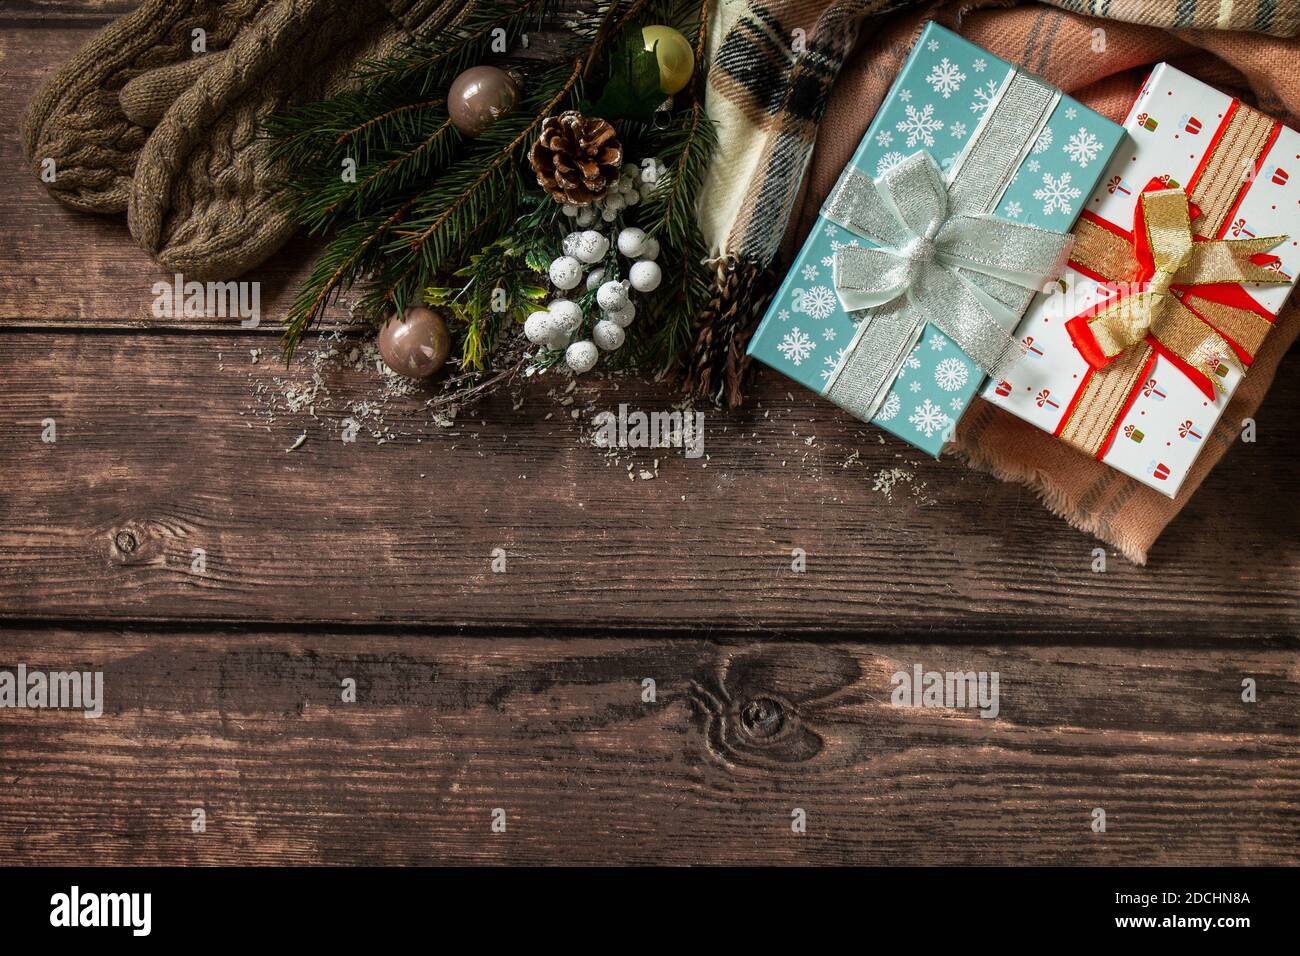 Rustic Christmas Gift Wrapping. Christmas gift boxes. View from above Stock  Photo - Alamy